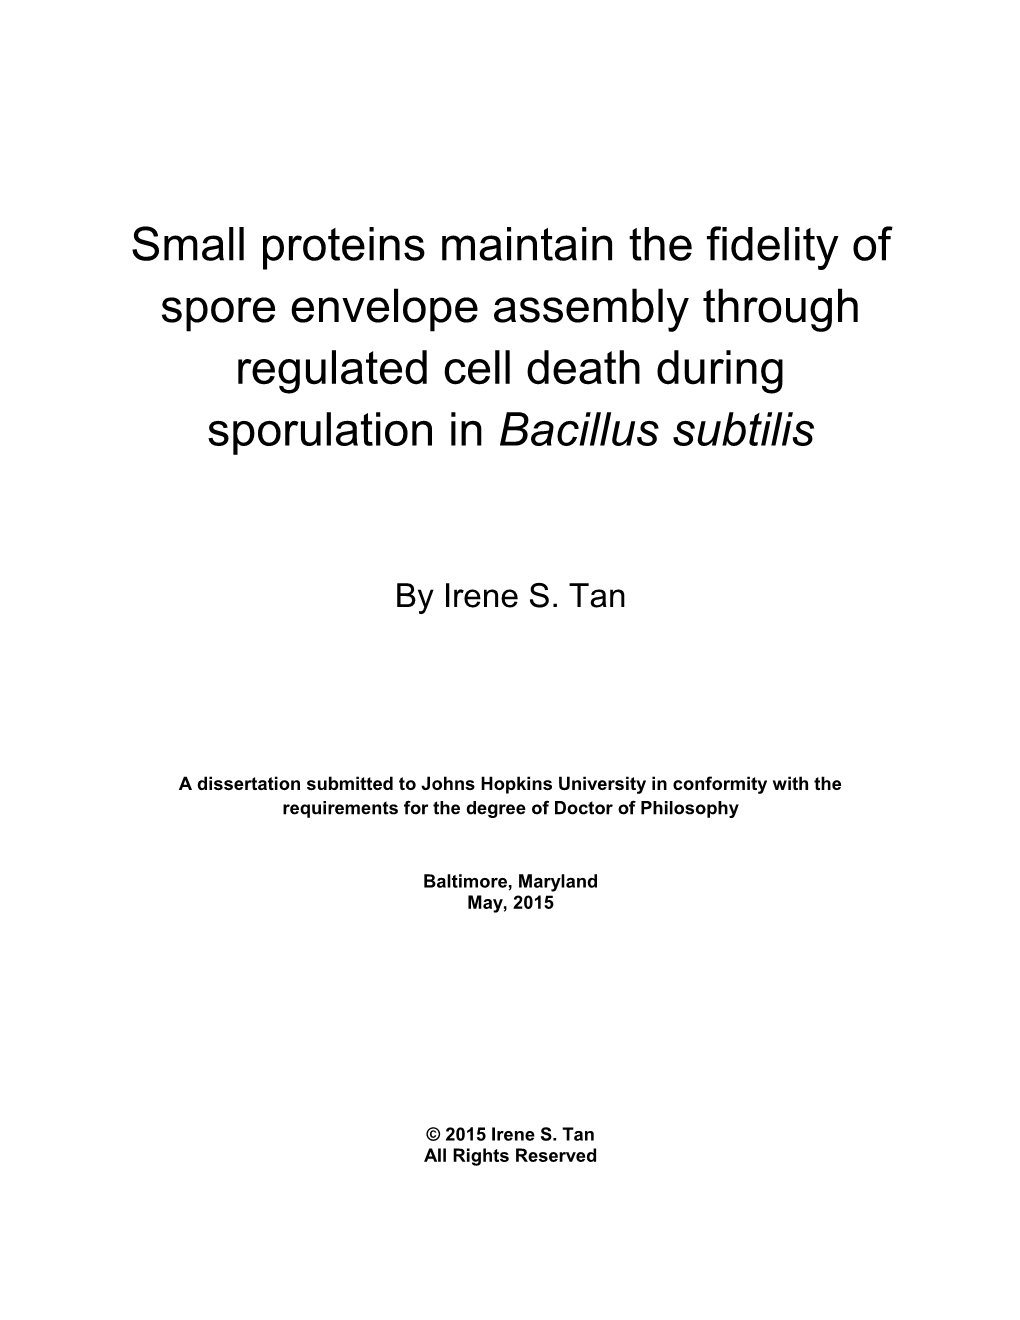 Small Proteins Maintain the Fidelity of Spore Envelope Assembly Through Regulated Cell Death During Sporulation in Bacillus Subtilis